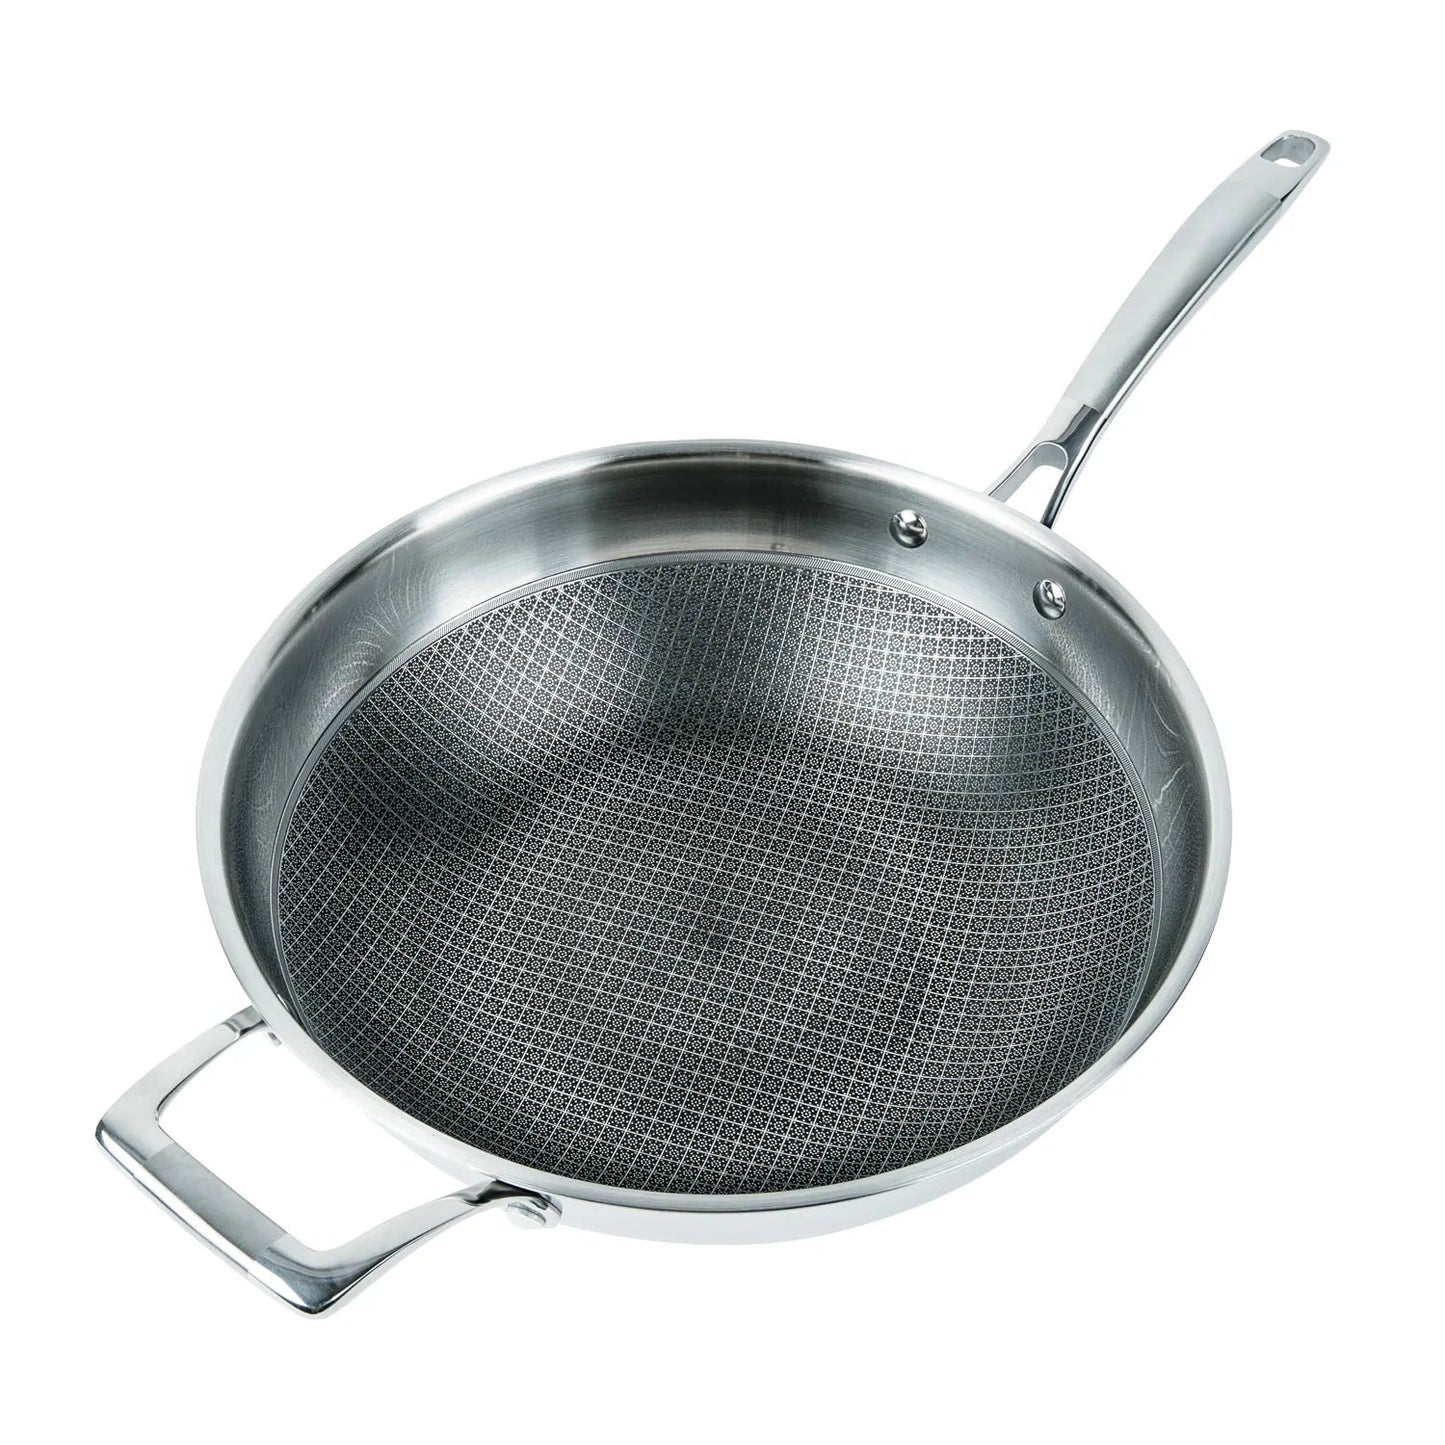 MASTERPAN Premium Series 12” Chef’s Wok and Glass Lid, 3-Ply Stainless Steel and Aluminum Scratch-Resistant